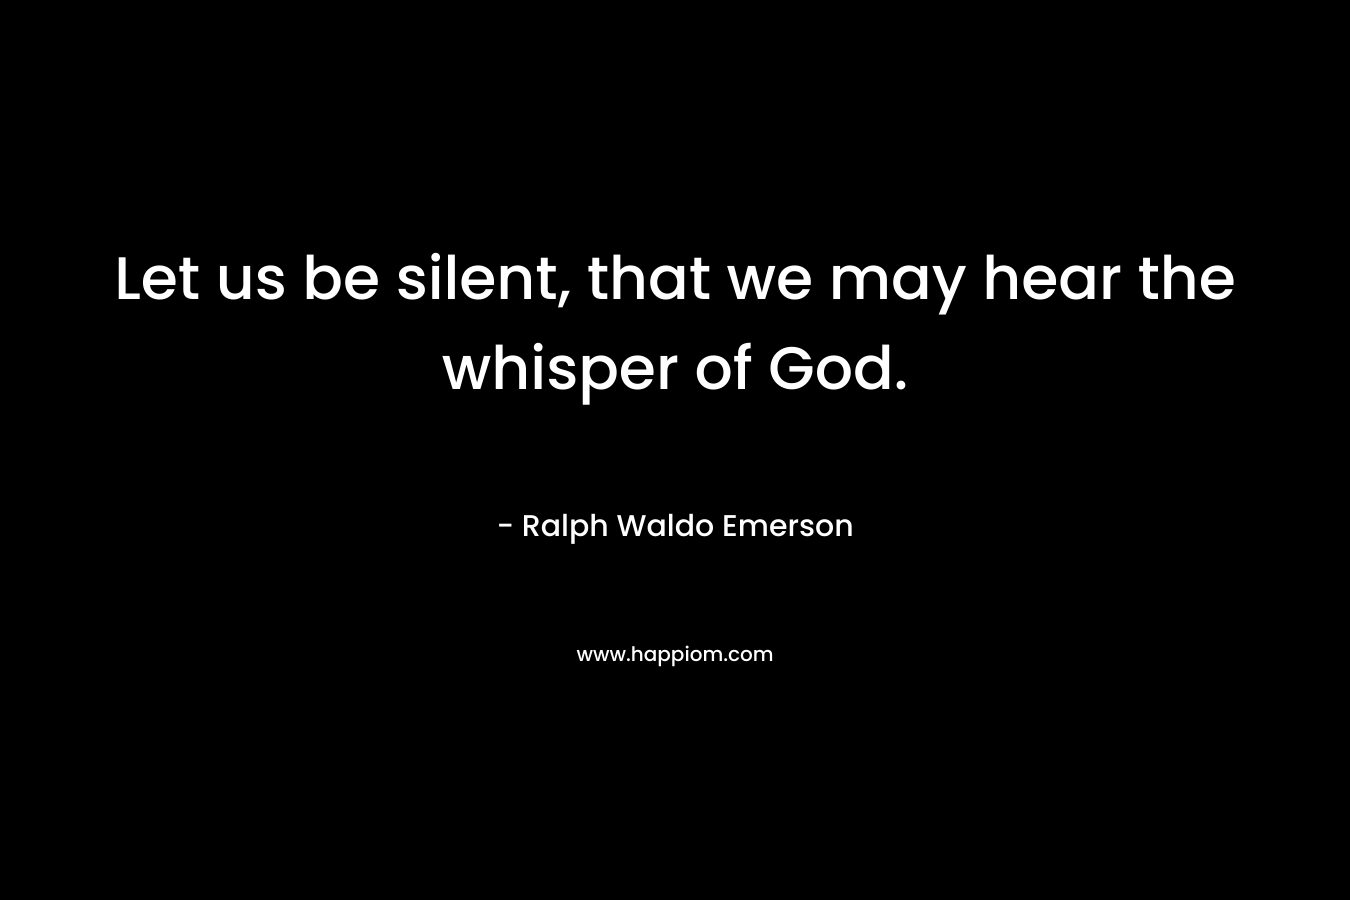 Let us be silent, that we may hear the whisper of God.